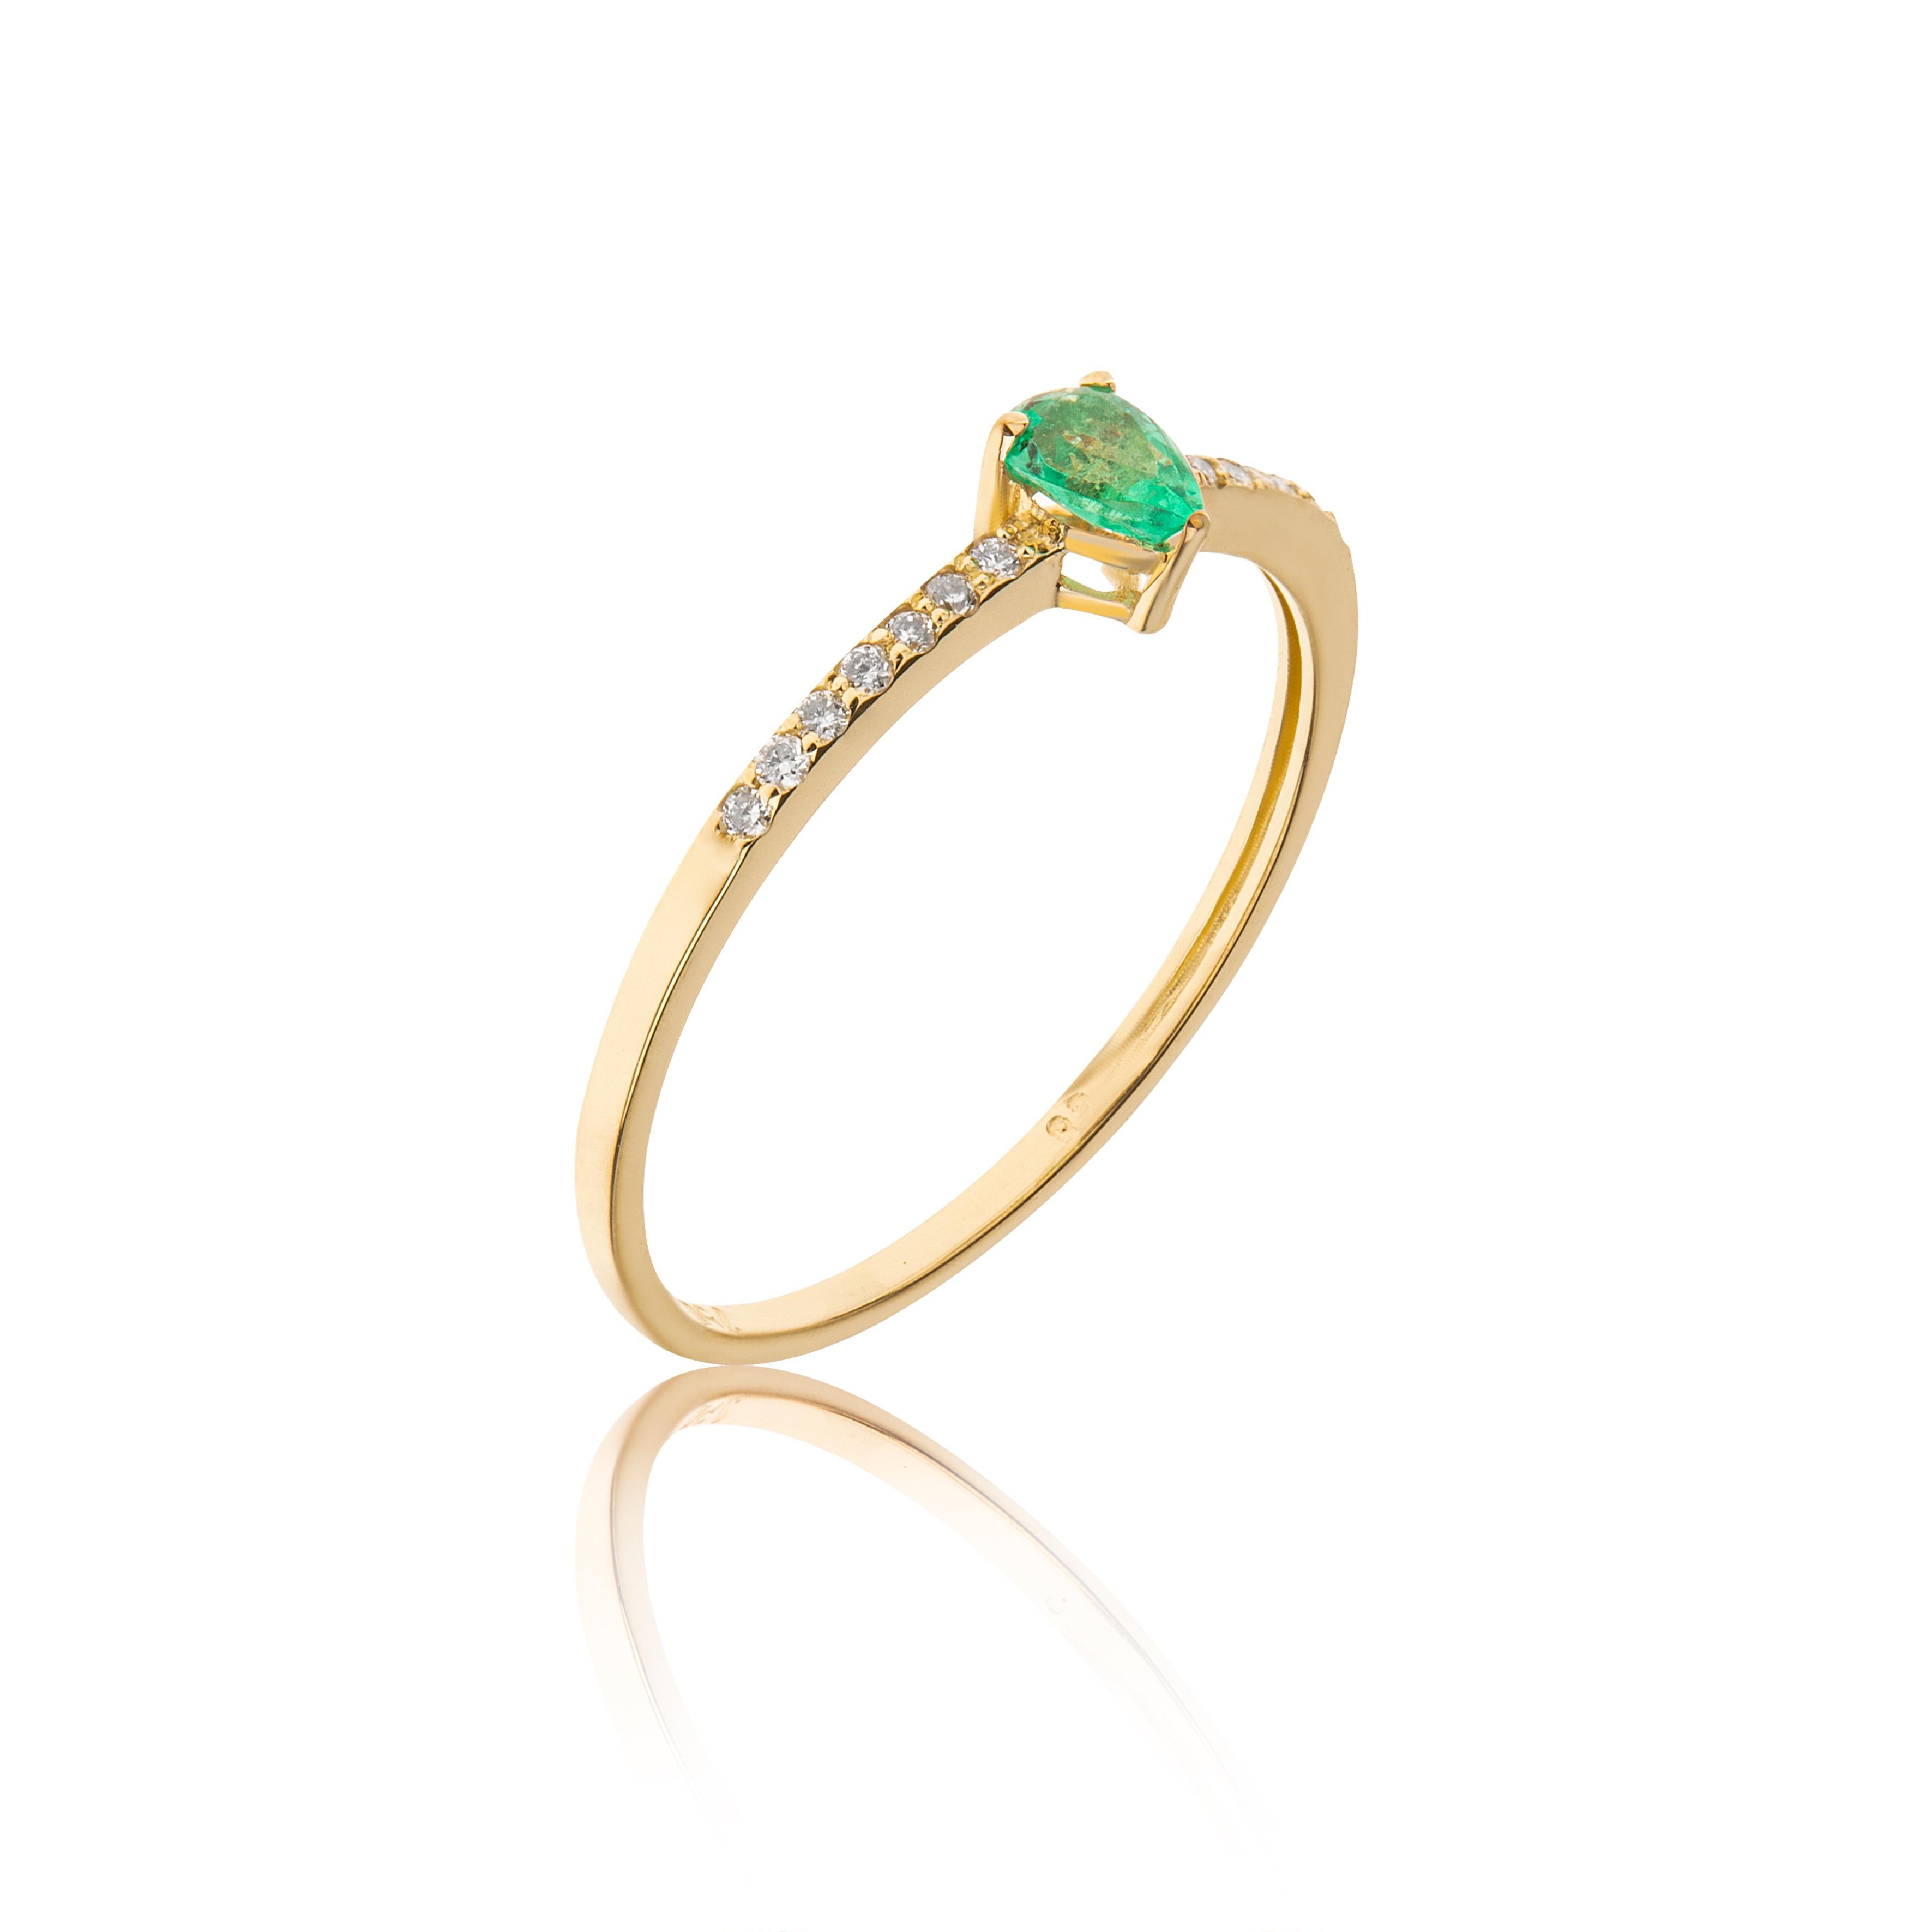 Emerald Pear Cut Stackable Ring with Diamonds Brilliant Cut in 18Kt Yellow Gold
The ring is hand made in 18Kt yellow gold. The main stone in the center is an emerald 0.16ct pear cut. On the sides of the ring, white diamonds are set in pave style,